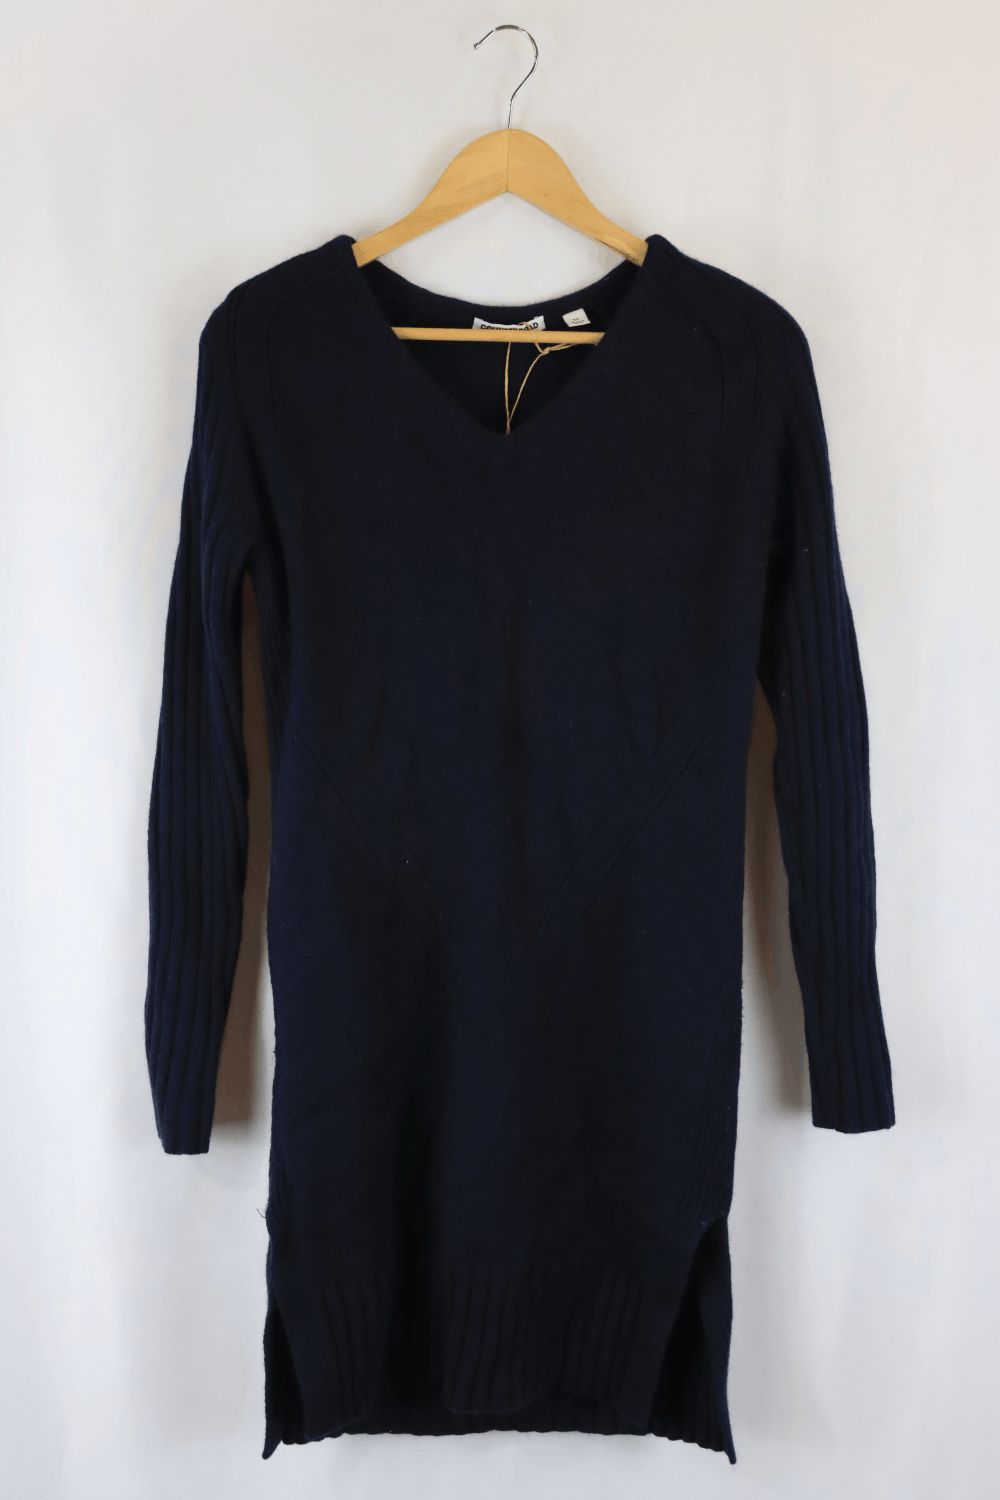 Country Road Navy Knit Jumper XS